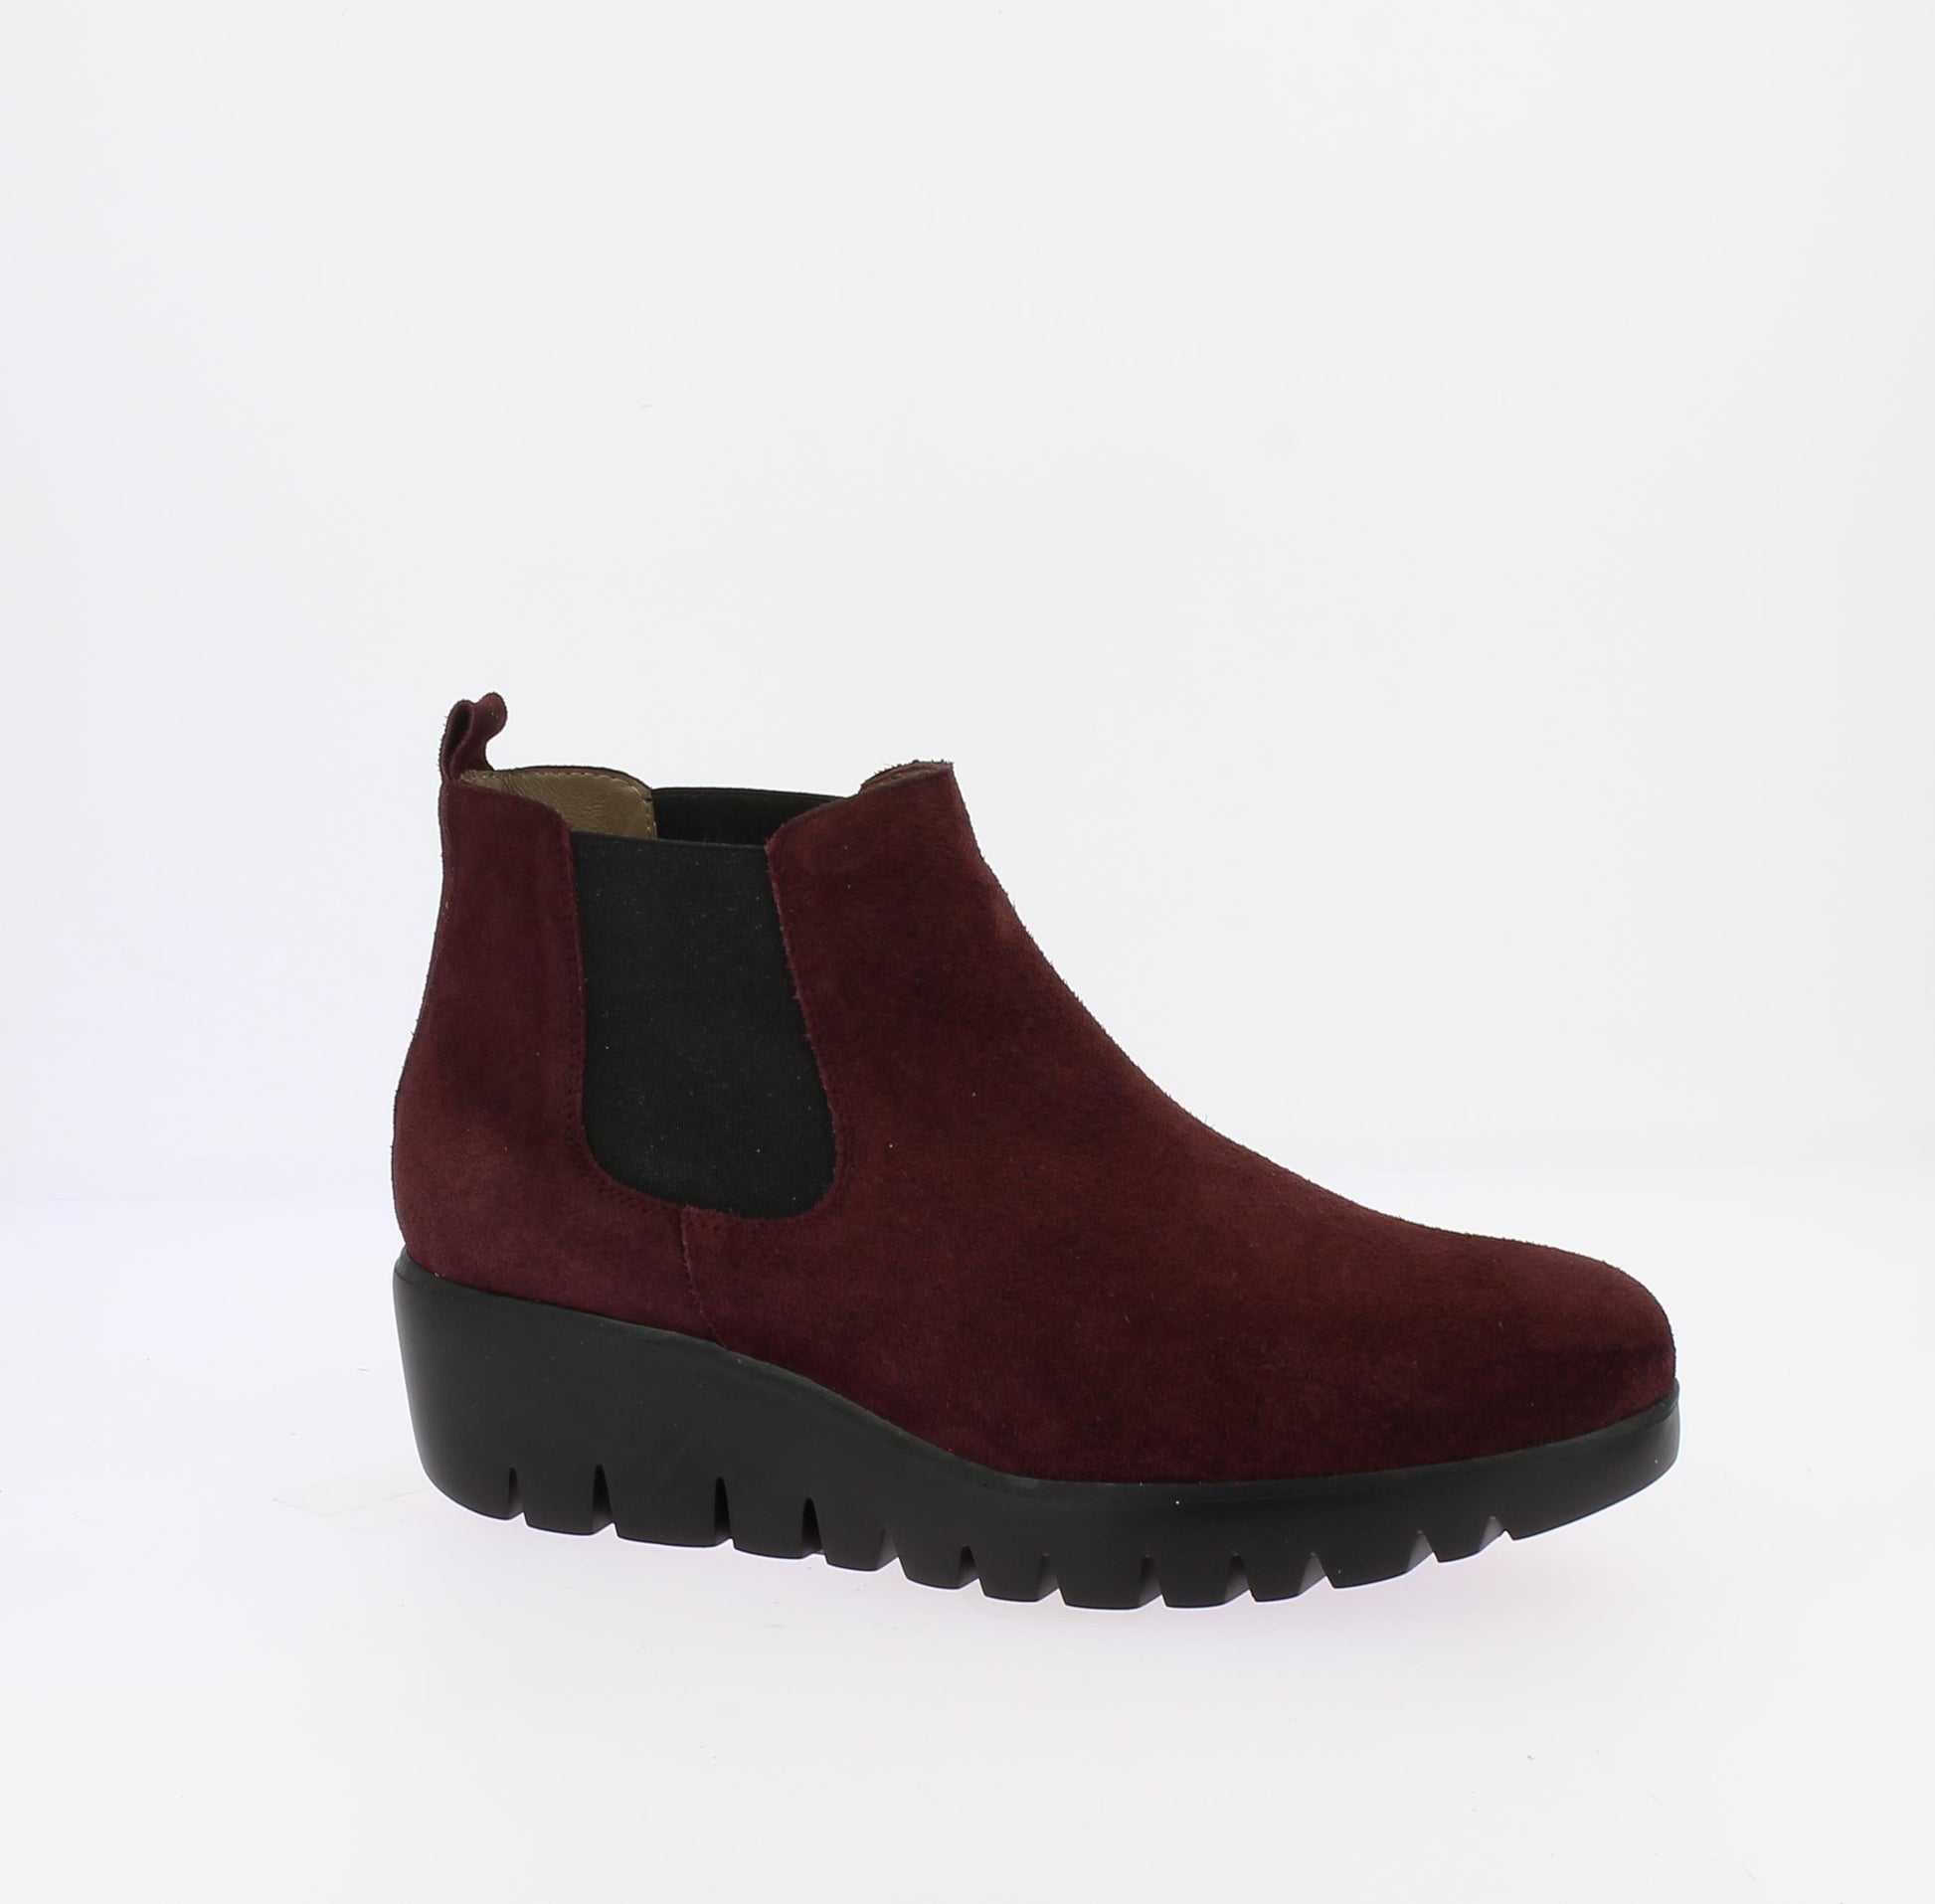 Dark wine coloured suede boot with a thick platform, wedge  sole and black elastic side cut out is pictured in profile.